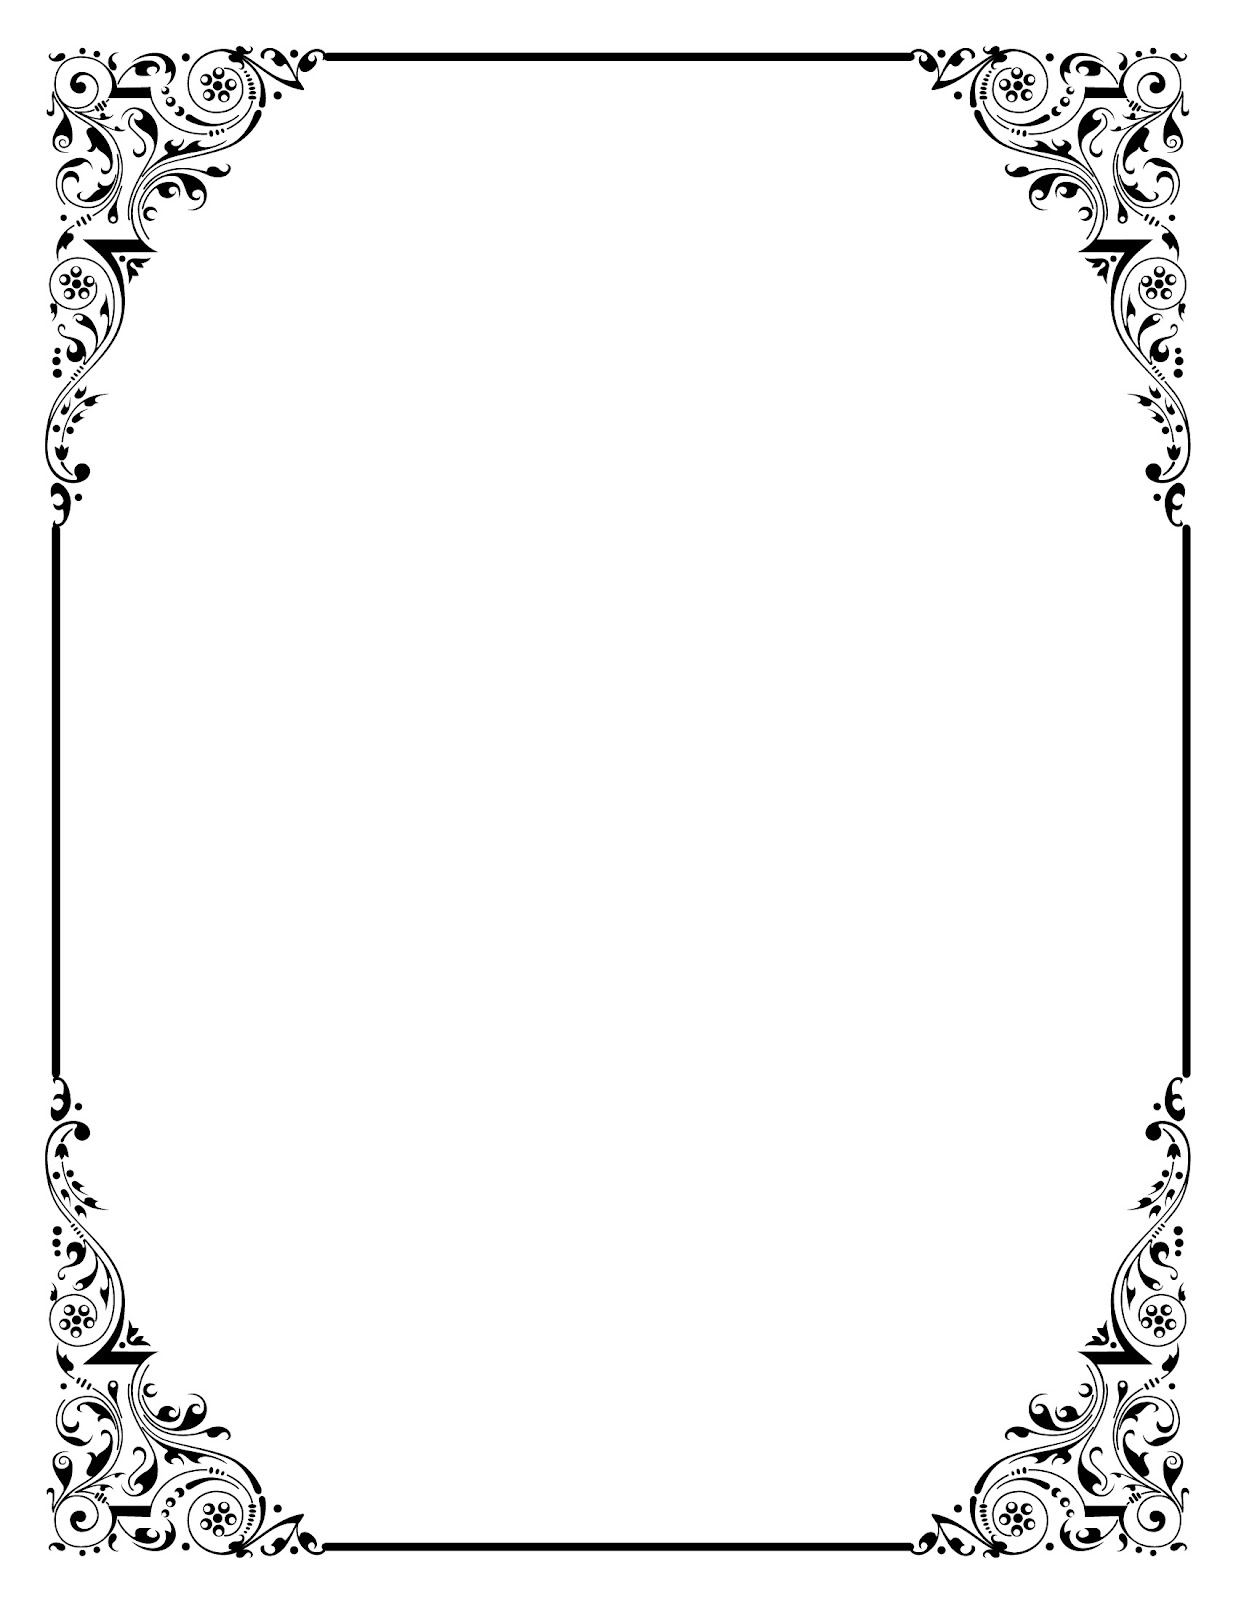 Free Frames Cliparts, Download Free Frames Cliparts png